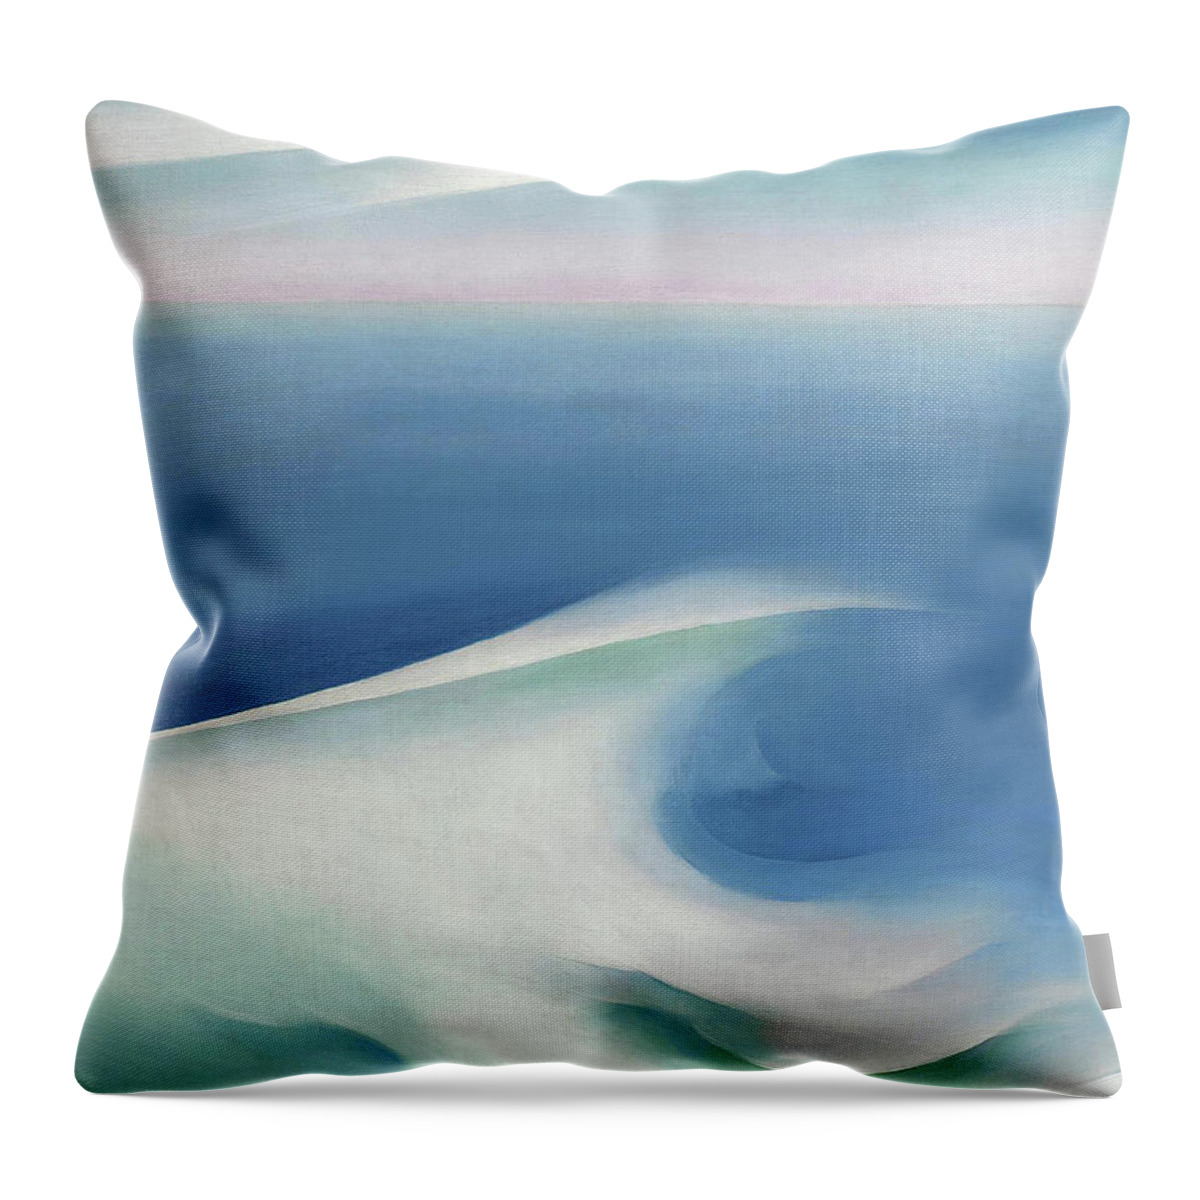 Georgia O'keeffe Throw Pillow featuring the painting Blue wave, Main - modernist abstract seascape painting by Georgia O'Keeffe